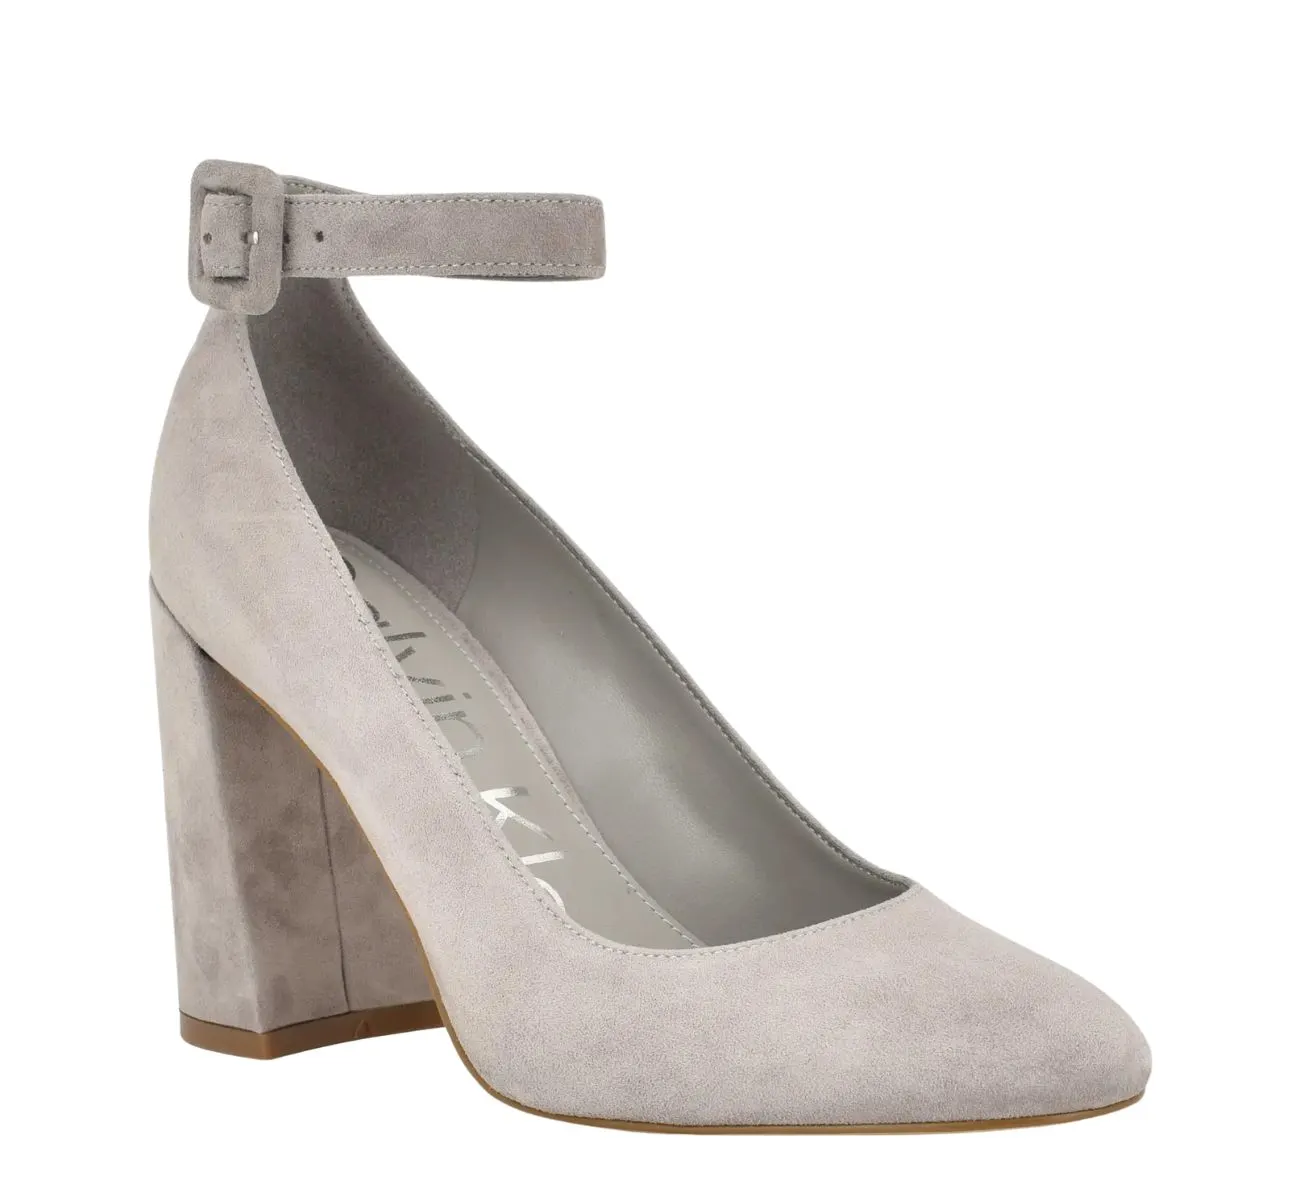 Grey suede pointed toe block heel with ankle strap on white background.